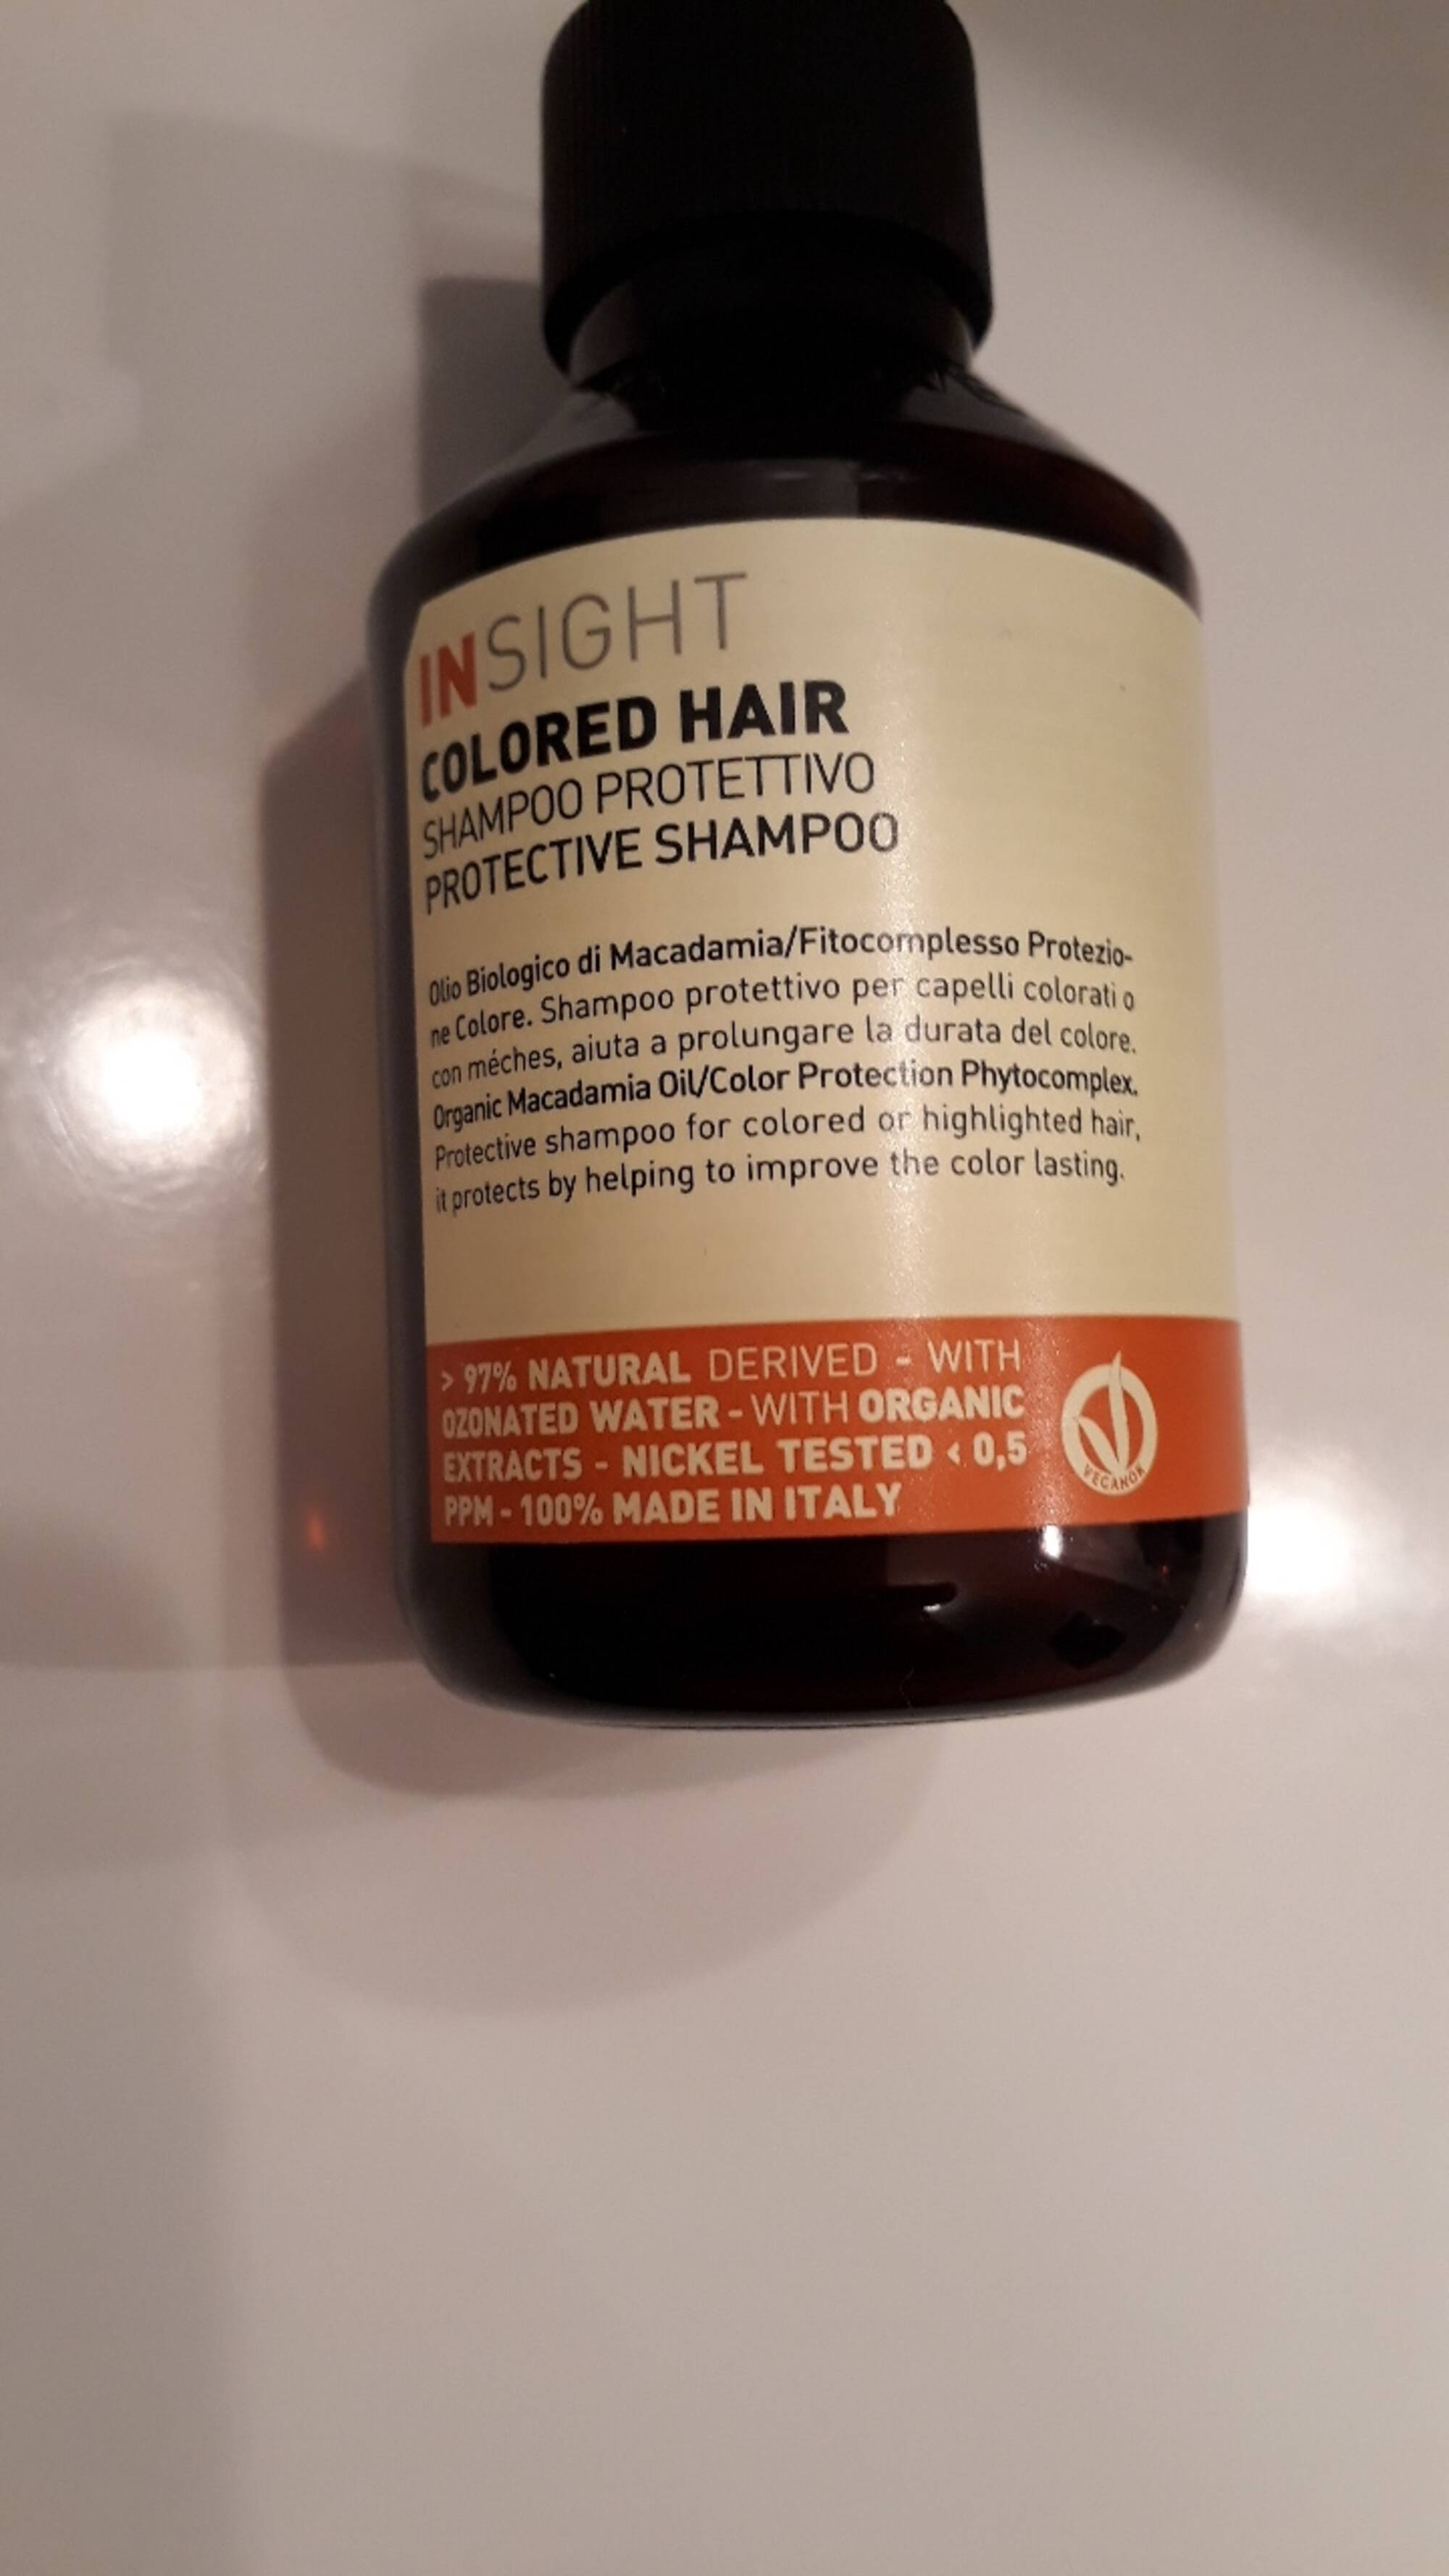 INSIGHT - Colored hair - Protective shampoo 